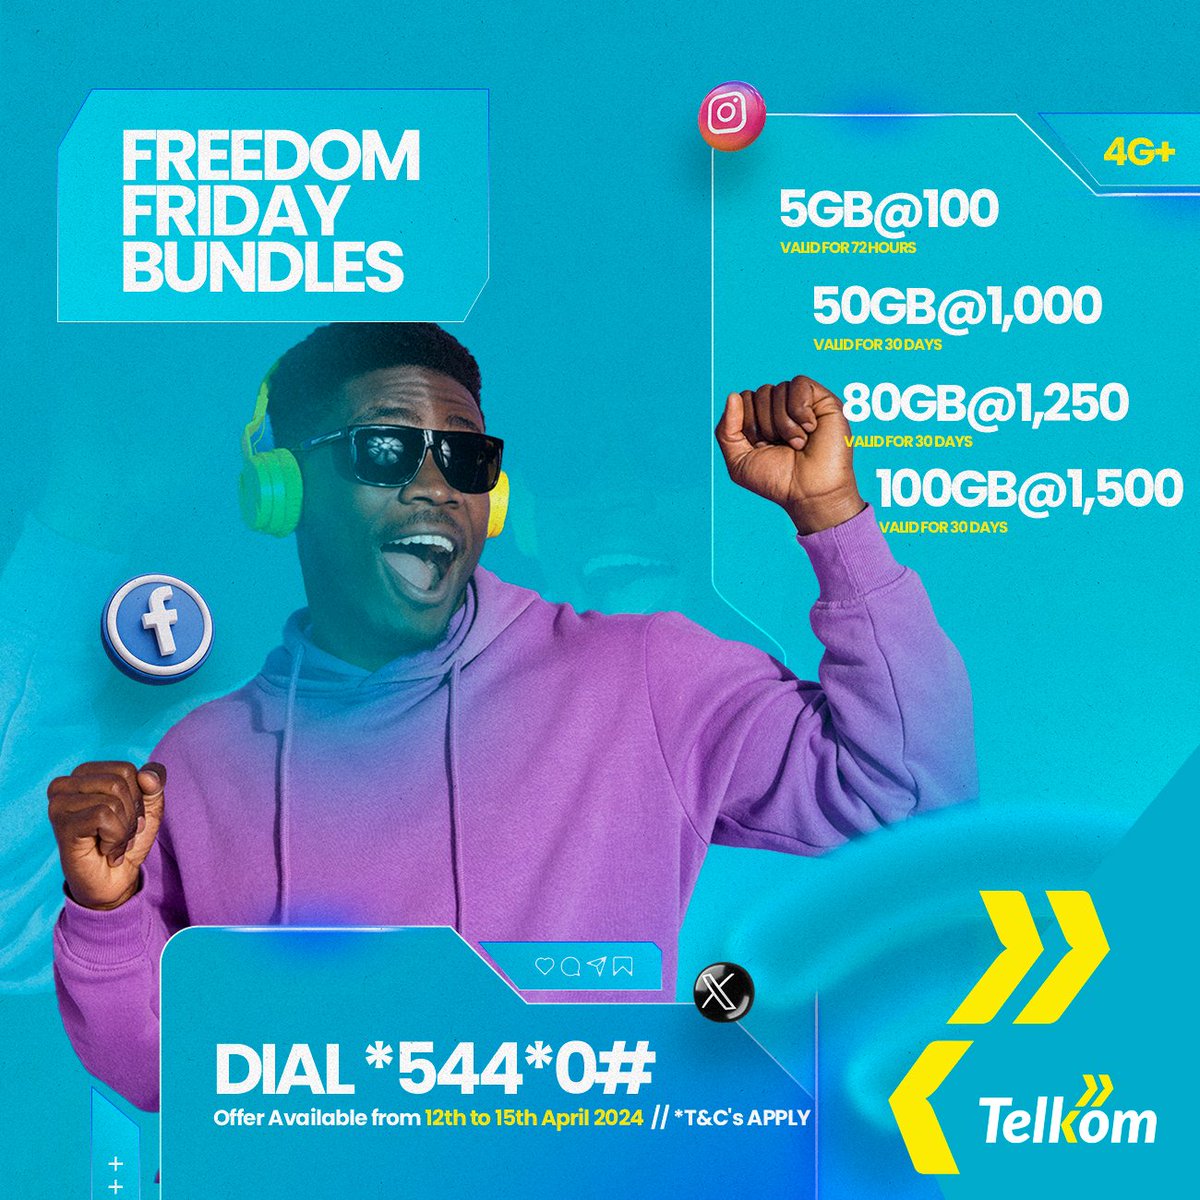 Embrace the freedom to stream, game, and connect with #FreedomFriday deals! 🎉 Shikilia 5GB for just 100 bob (valid 72 hours) or dive into 50GB for 1K valid 30 days. Whether unakeep up na story za TL ama unabinge ma-series, tuko na bundle yako! Dial *544*0# to get started💃